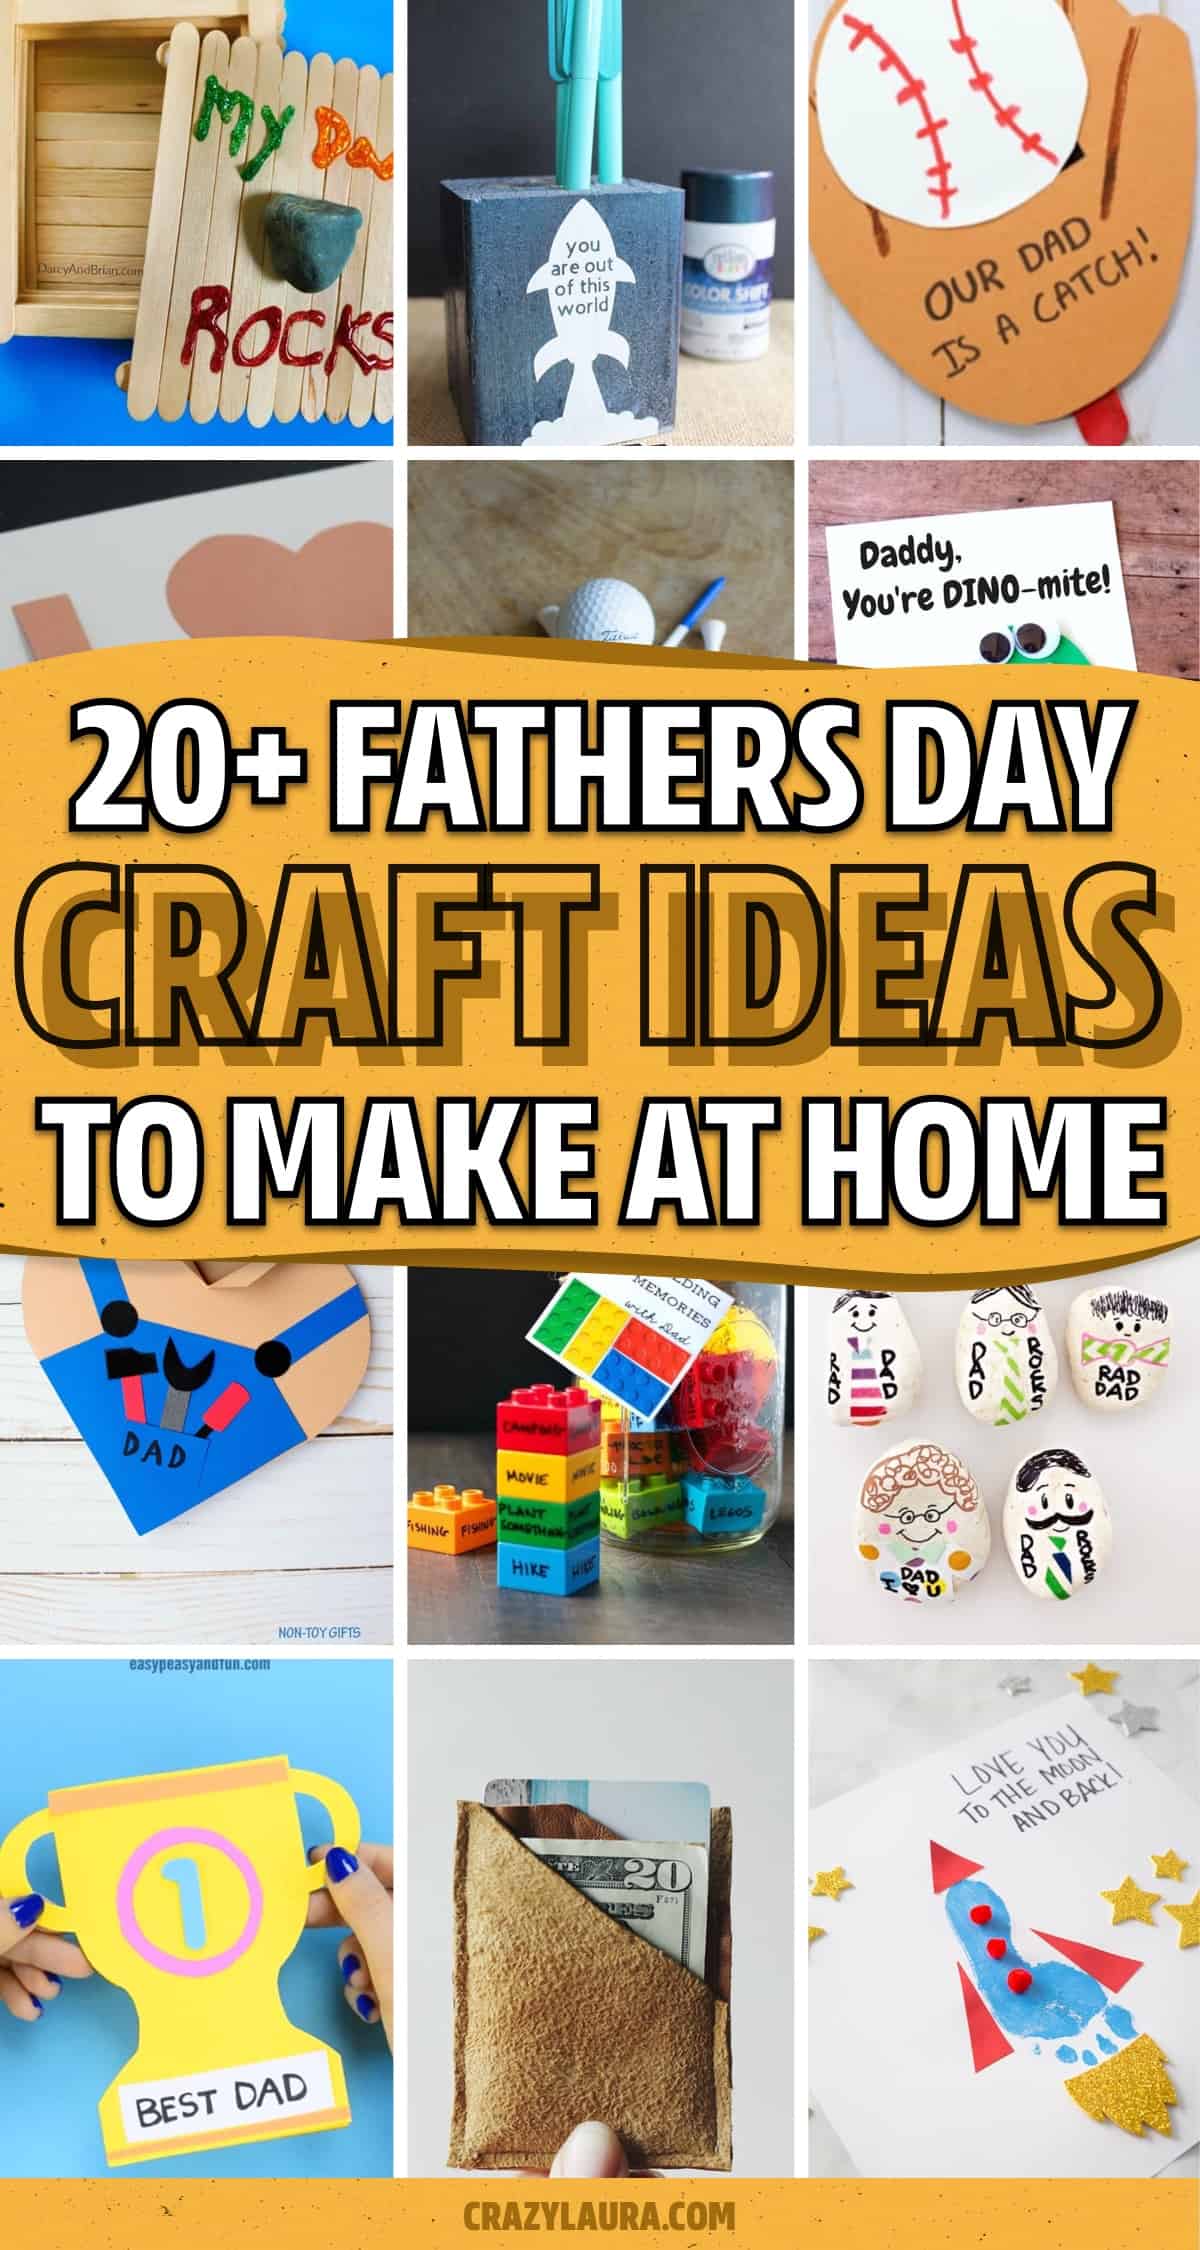 thoughtful crafts for fathers day